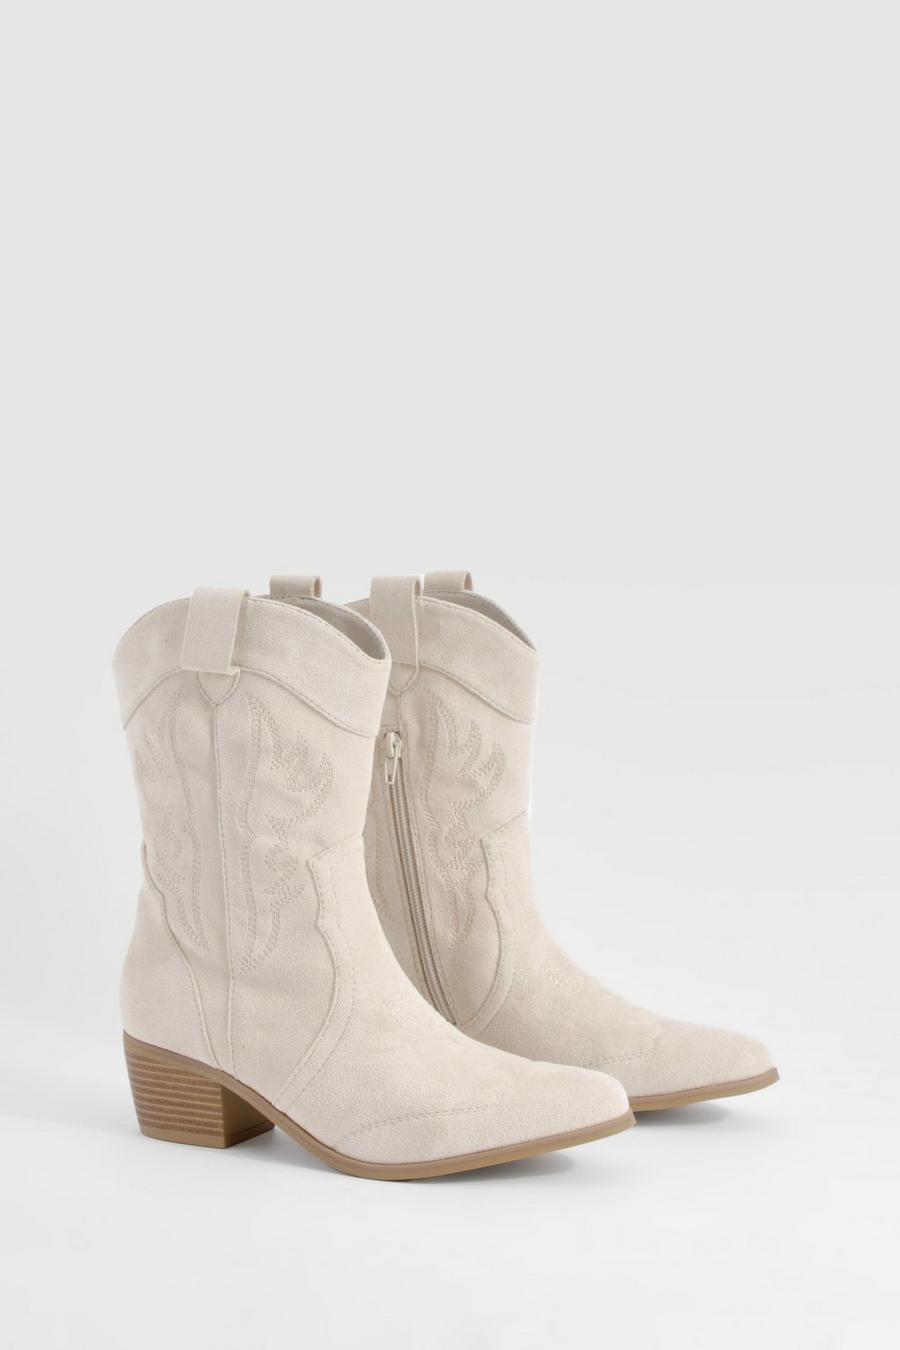 Light beige Embroidered Western Ankle Cowboy Boots image number 1